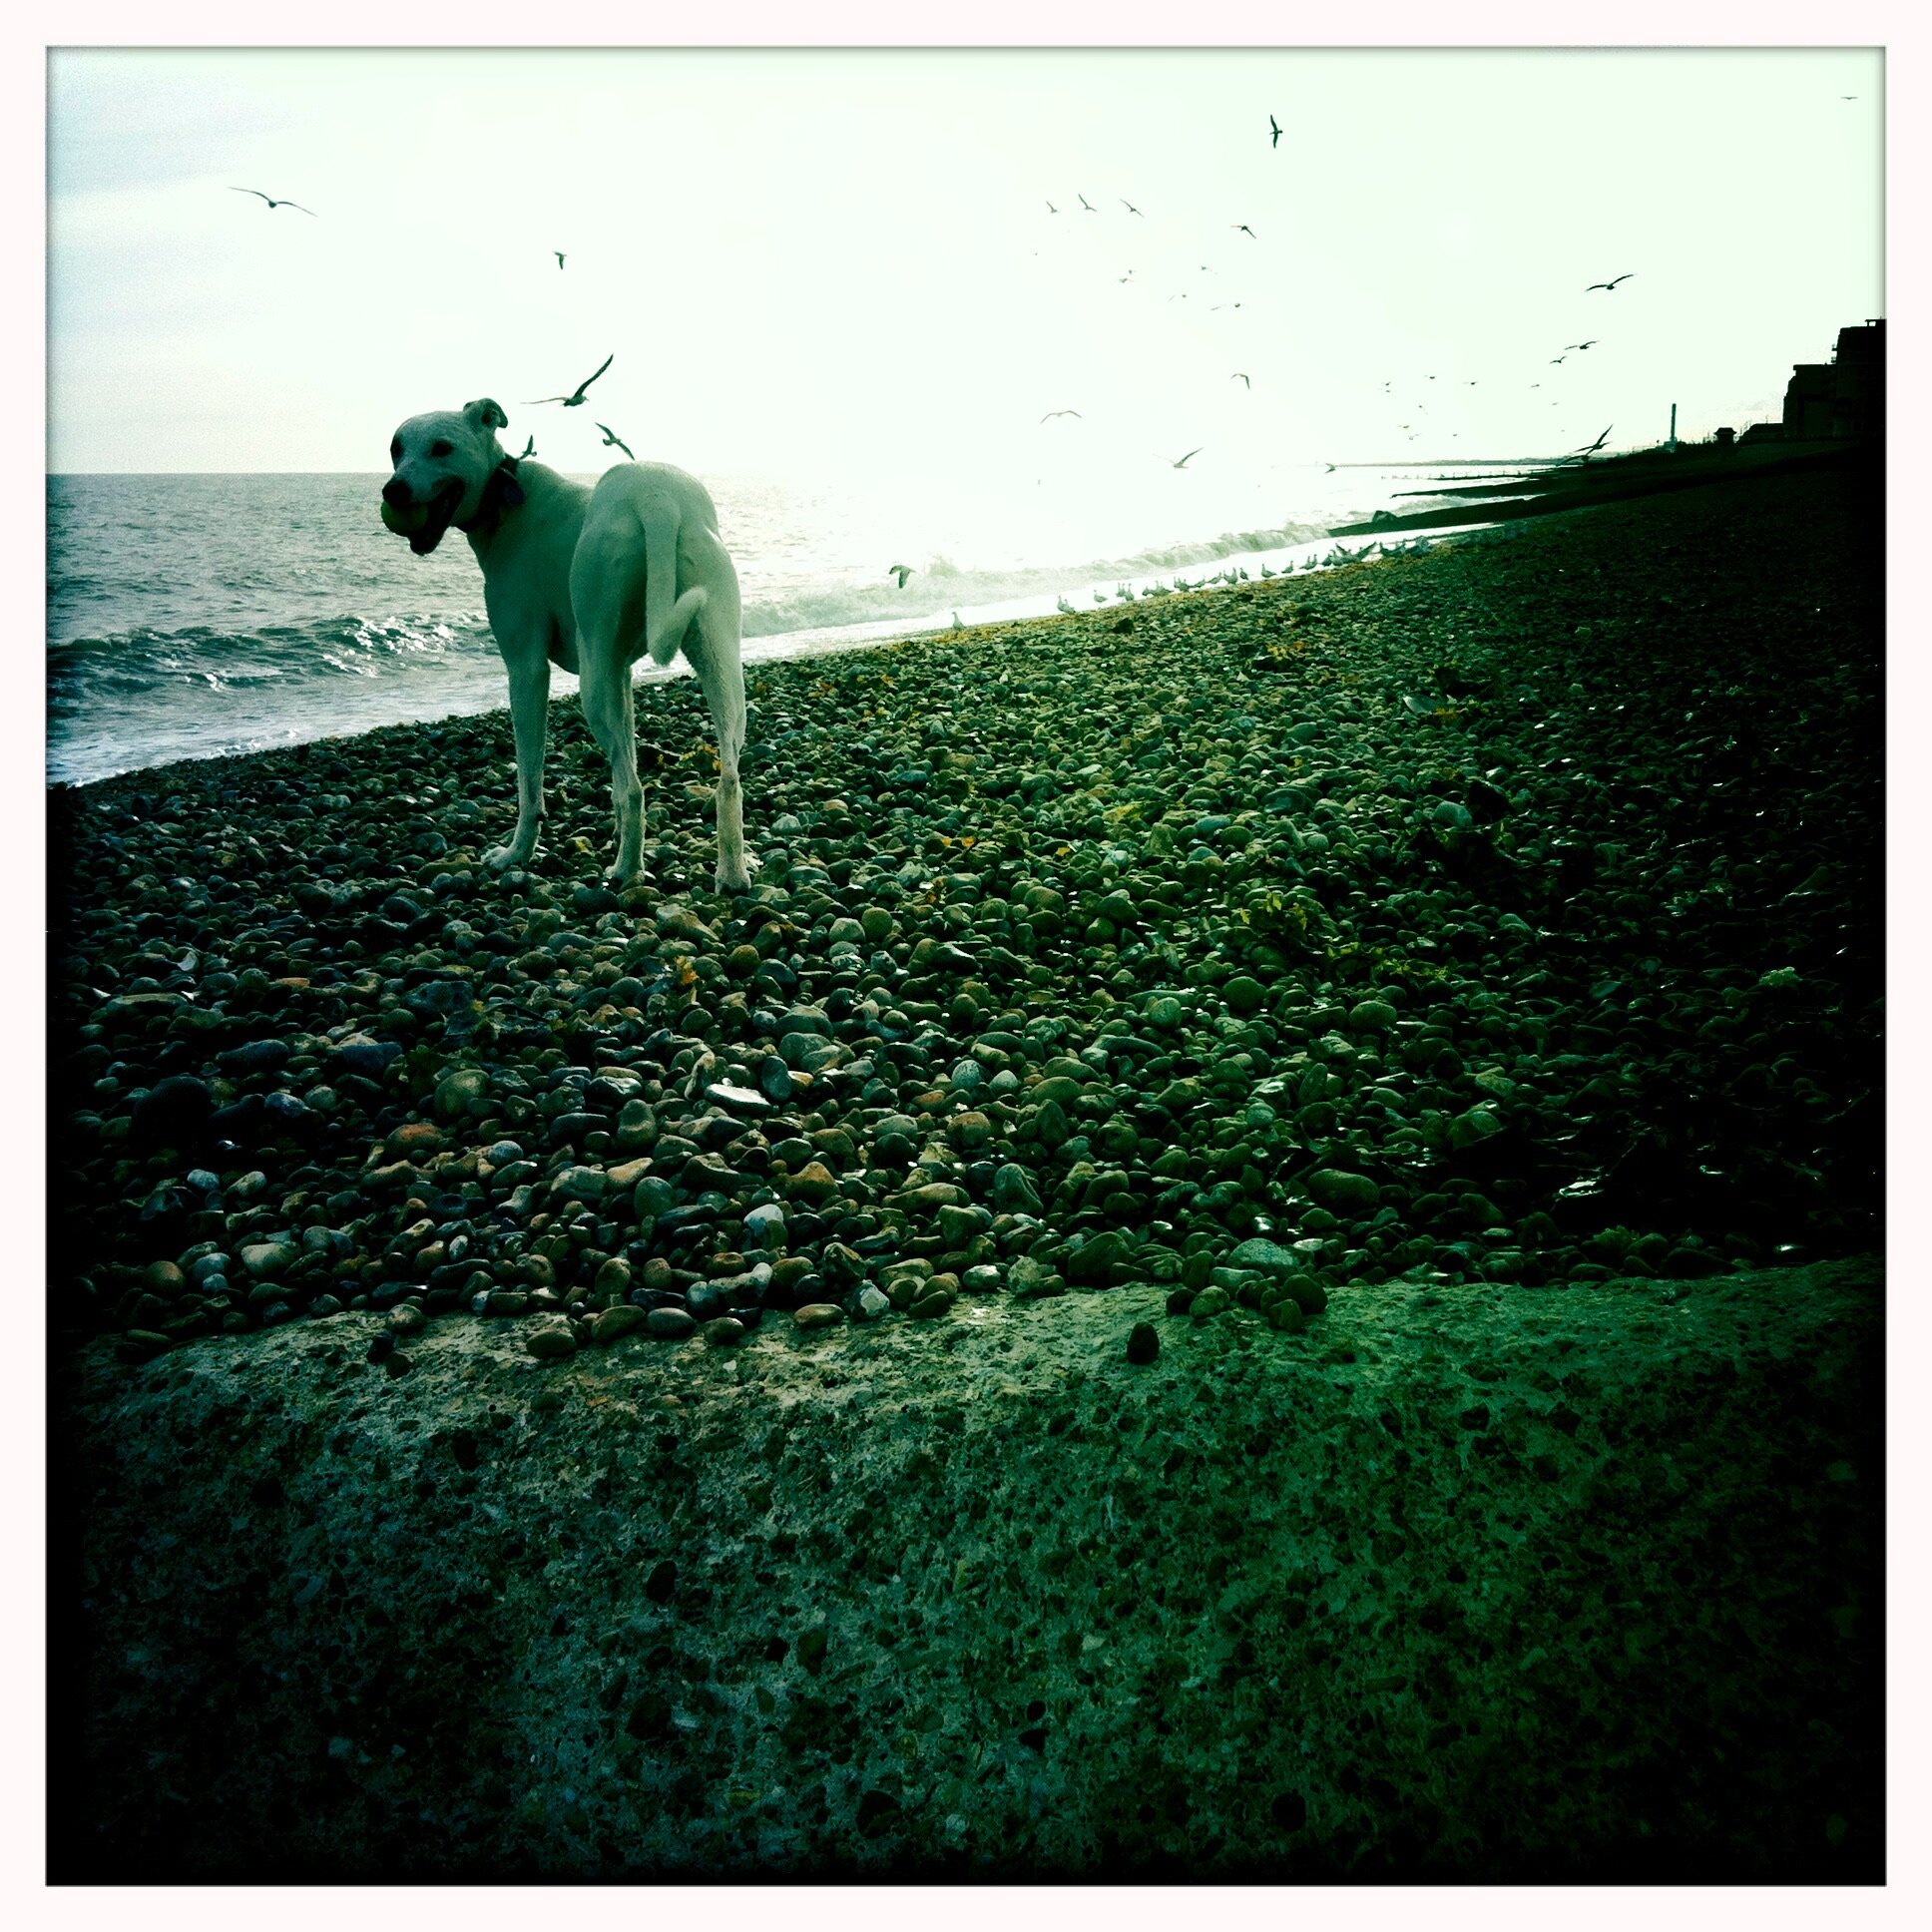 Digby, waiting for his human to climb the groyne